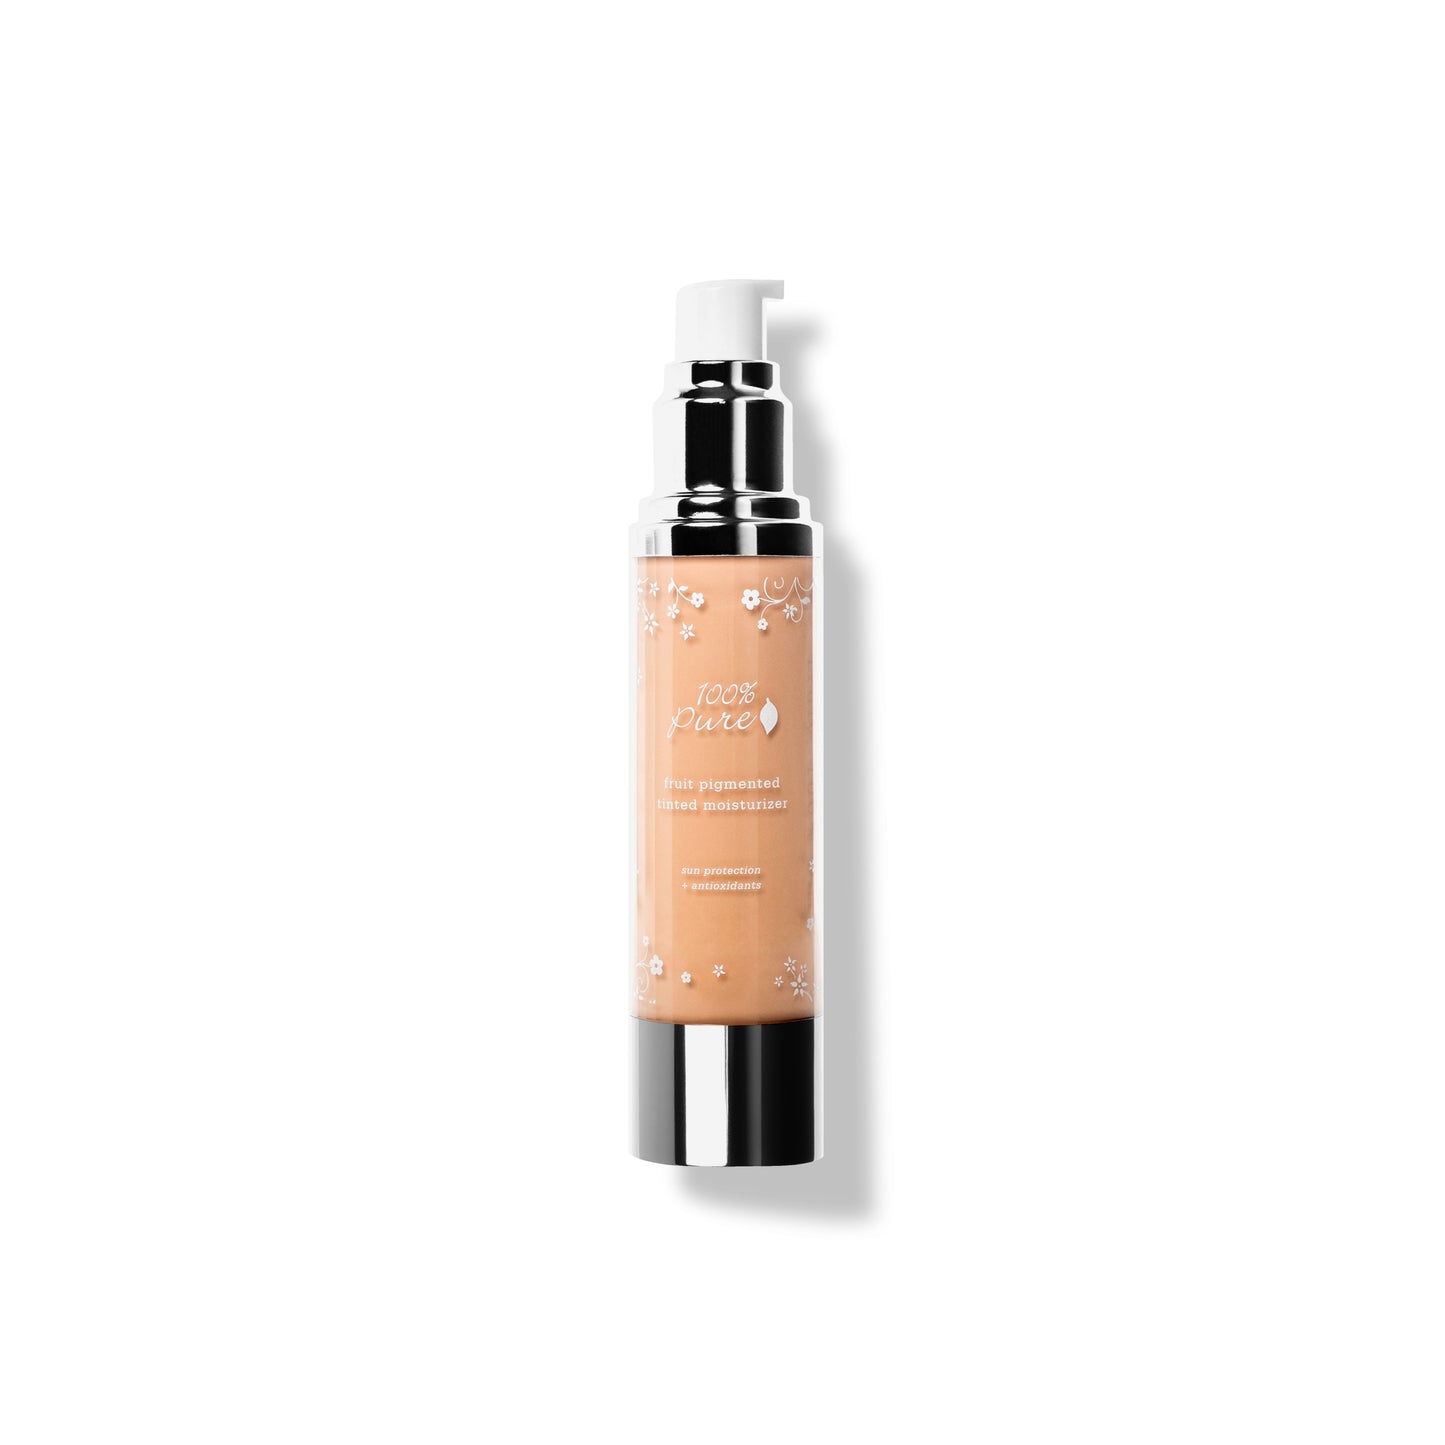 100% PURE Fruit Pigmented Tinted Moisturizer white peach